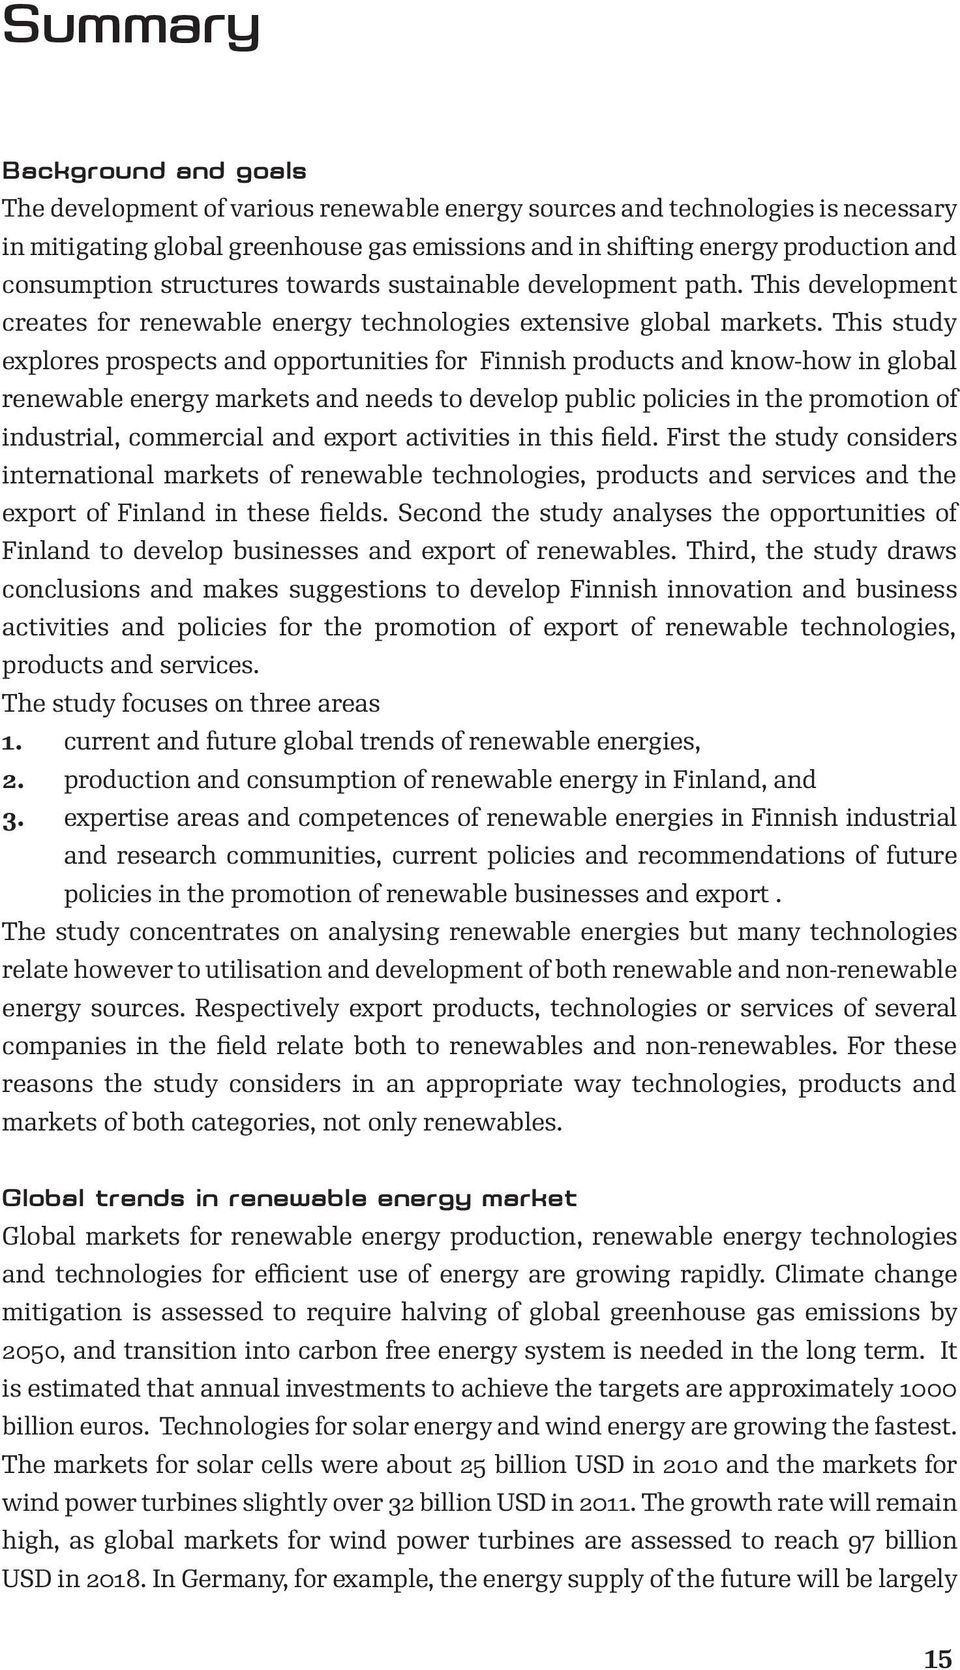 This study explores prospects and opportunities for Finnish products and know-how in global renewable energy markets and needs to develop public policies in the promotion of industrial, commercial